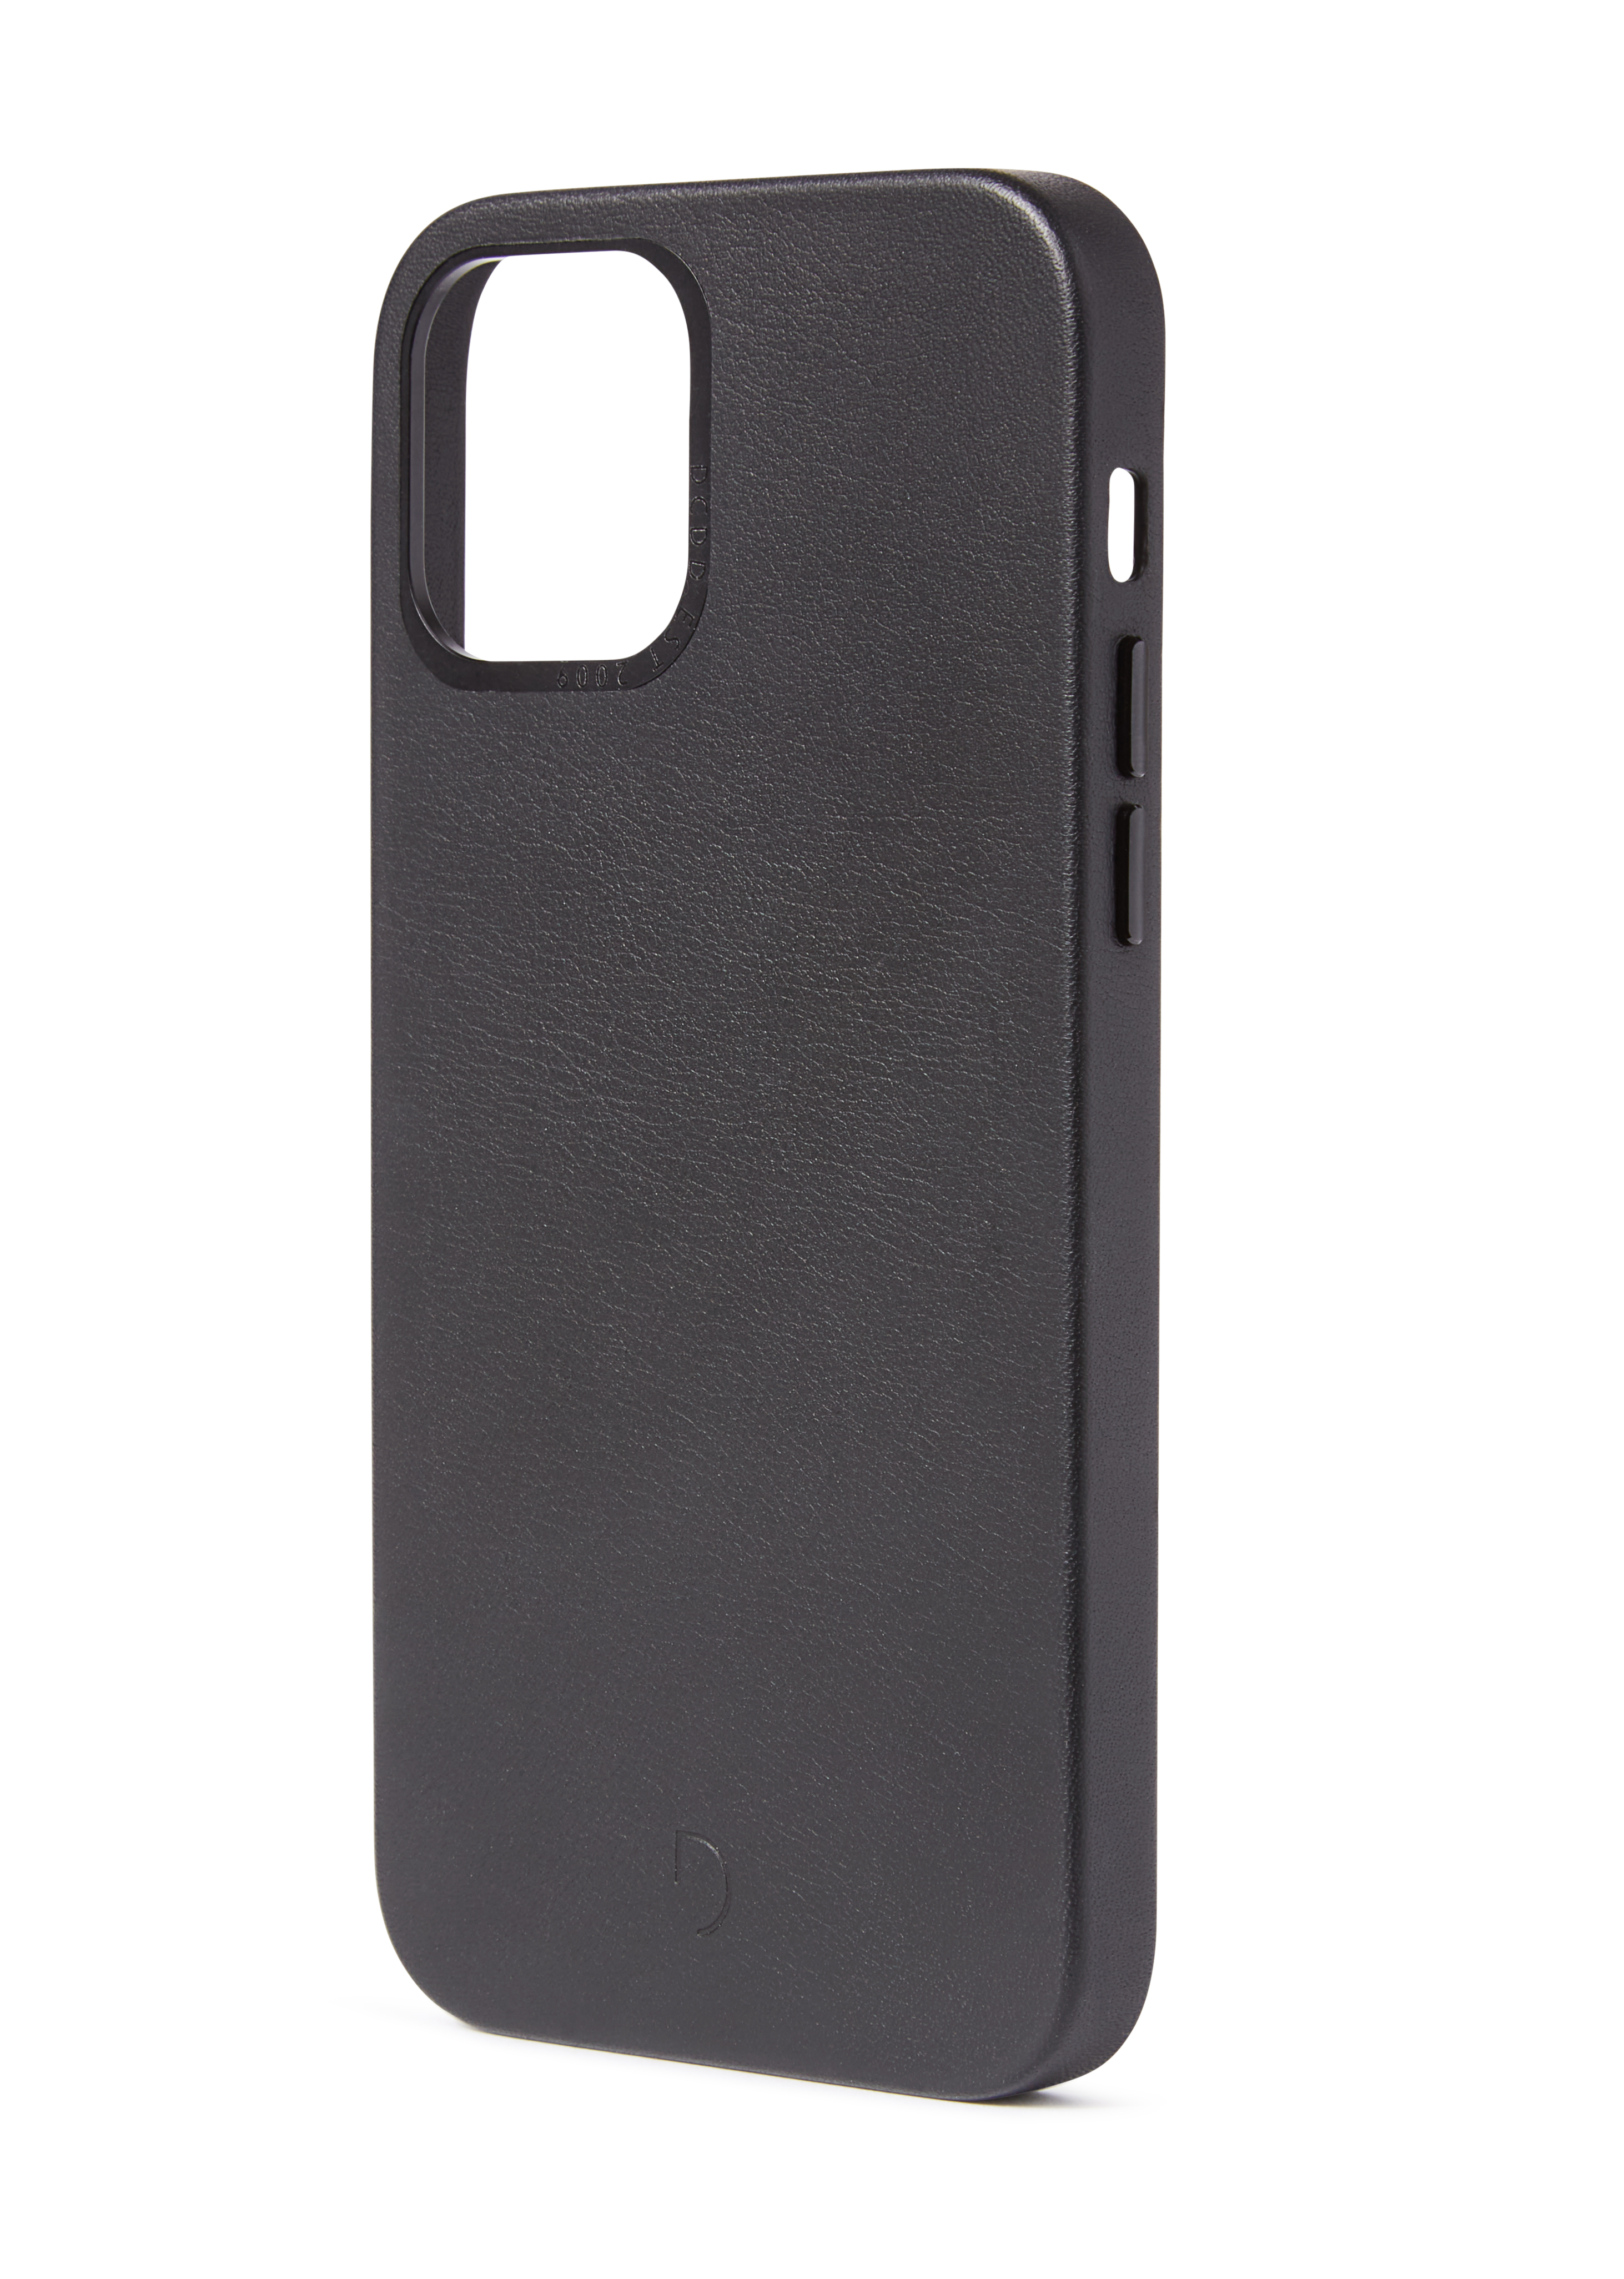 iPhone 12 Pro Max, leather case magsafe, black